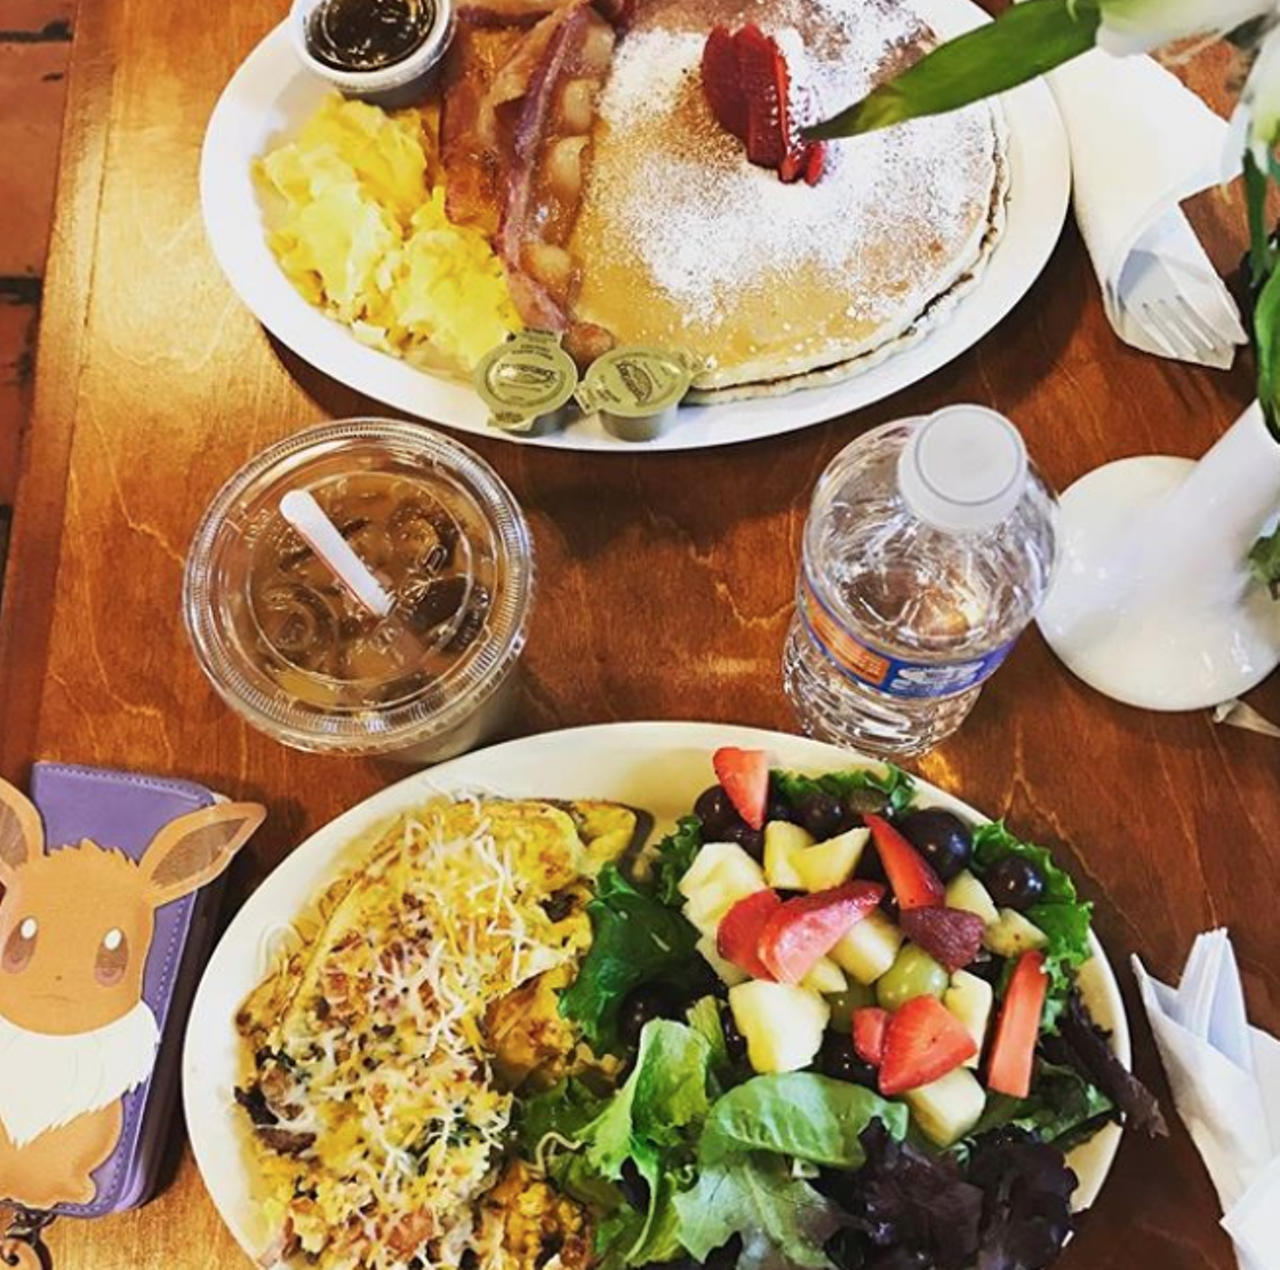 La Villita Cafe
418 Villita St., (210) 223-4700, lavillitacafe.com
Enjoy freshly-made pastries, breakfast tacos or an omelette plate at this Downtown spot. Plus, daily specials (both happy hour and all-day) will make your visit all the more worthwhile.
Photo via Instagram / crystalfos